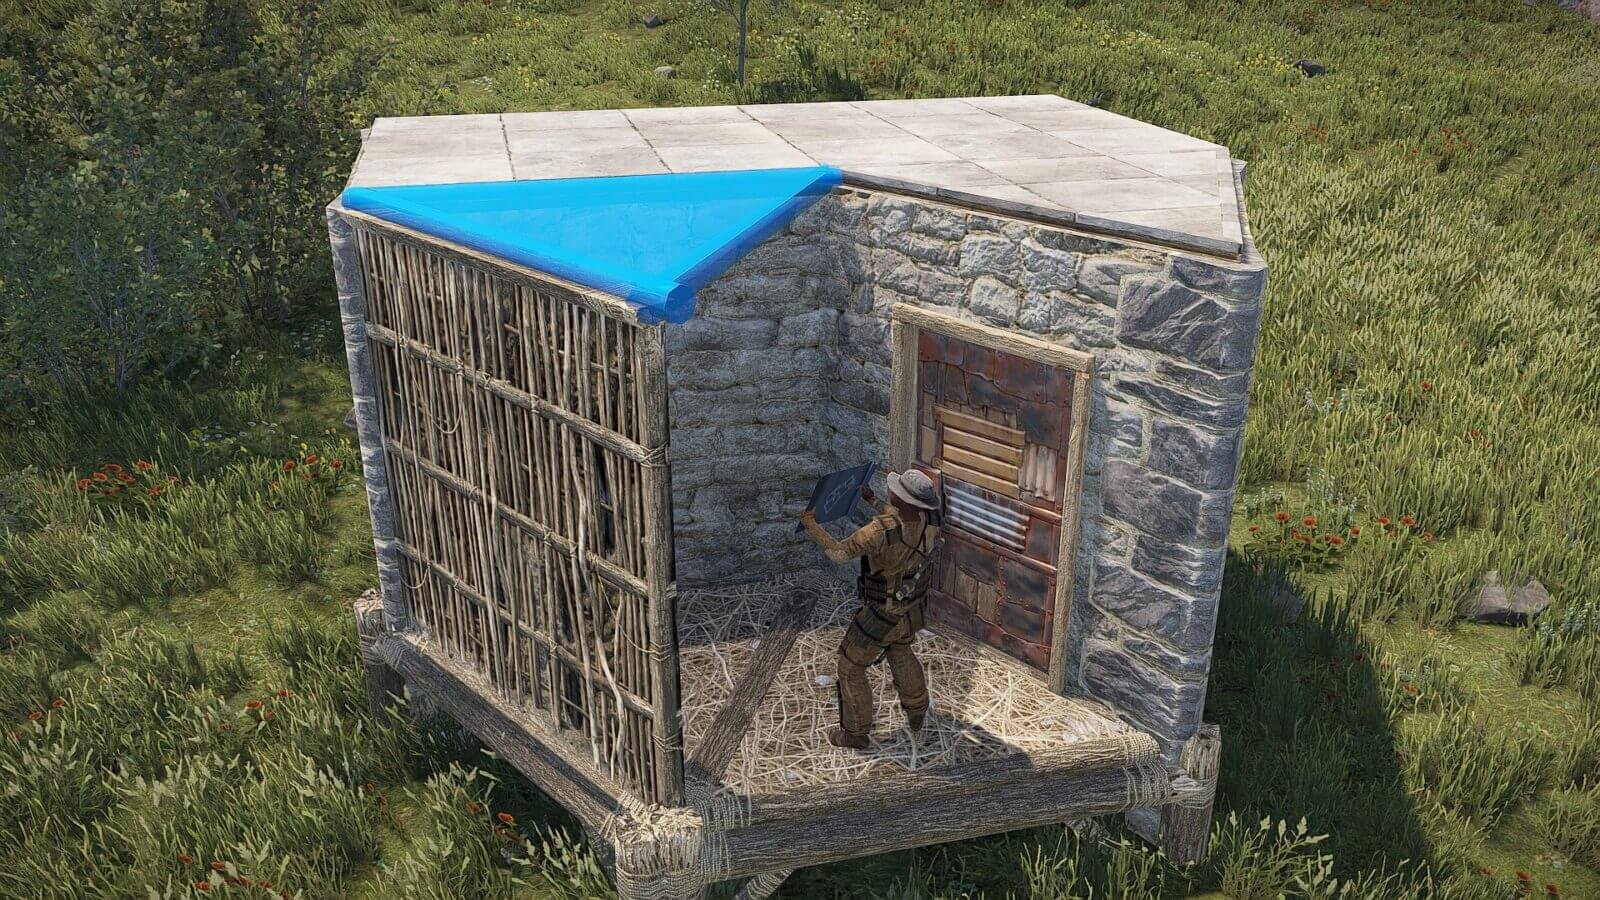 Upgrading your base in Rust for more room and storage as well protection.